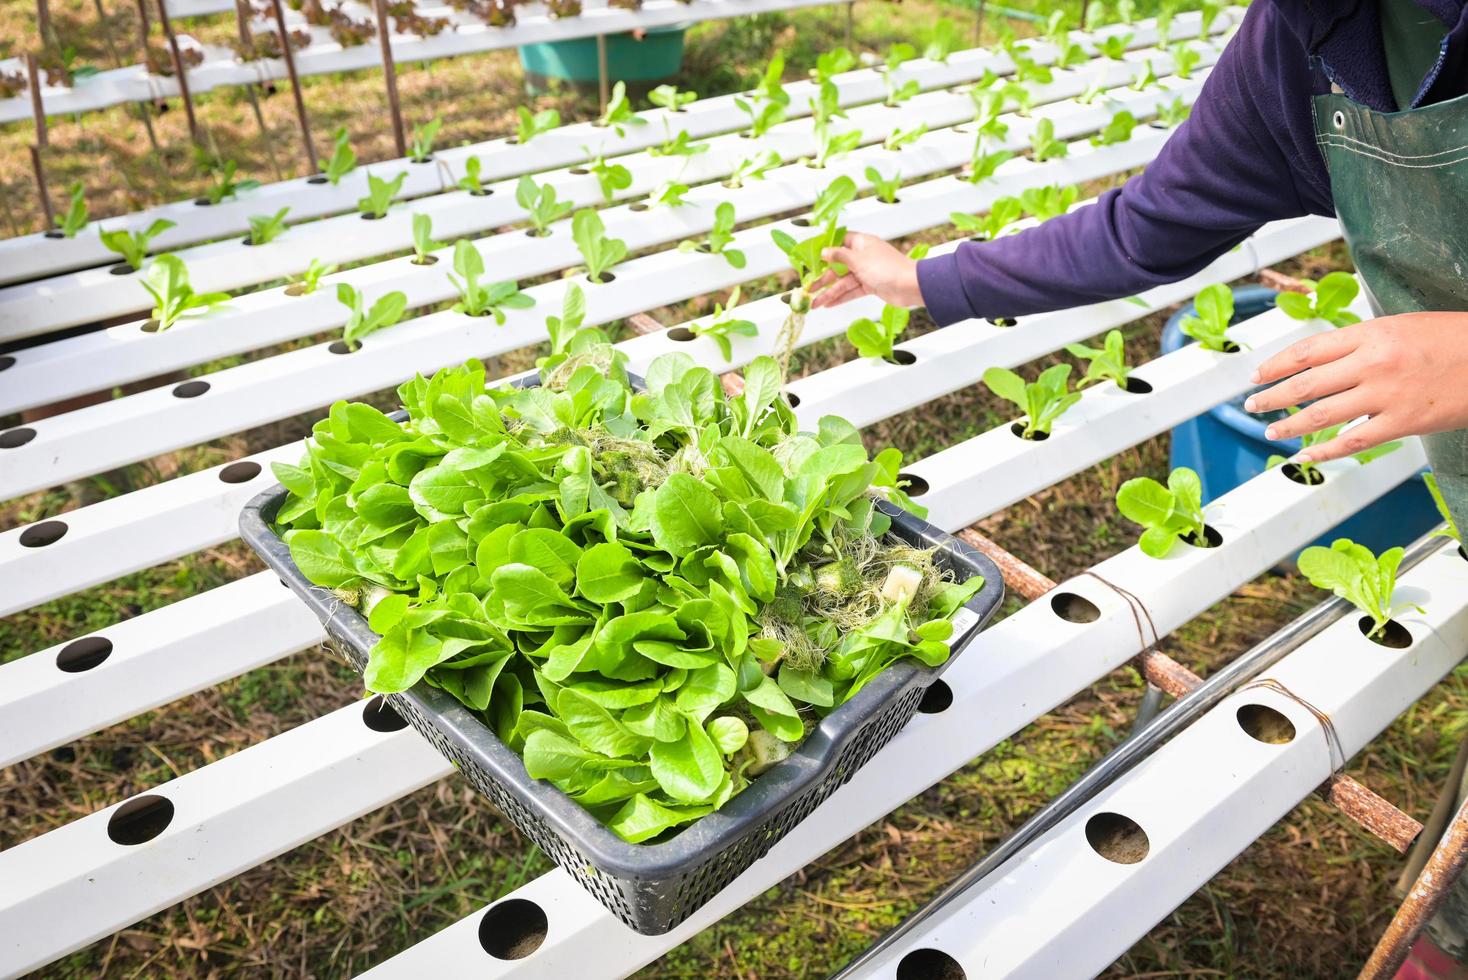 hydroponic planting in the hydroponic vegetables system on hydroponic farms green cos lettuce growing in the garden, gardener hydroponic plants on water without soil agriculture organic grow plants photo